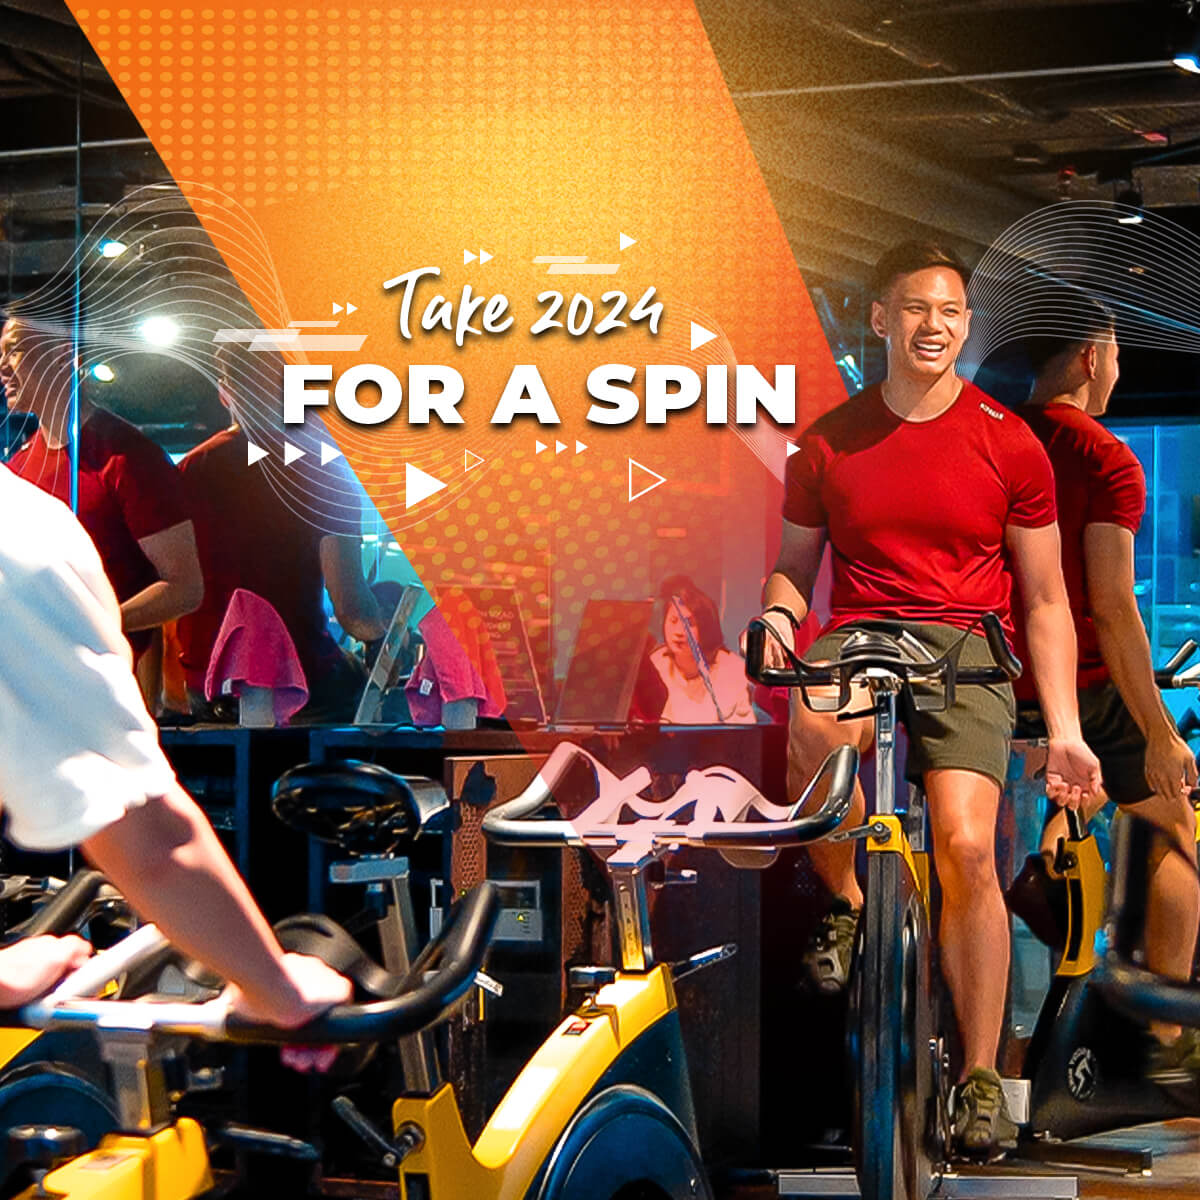 Are You a Spin Fanatic Yet?